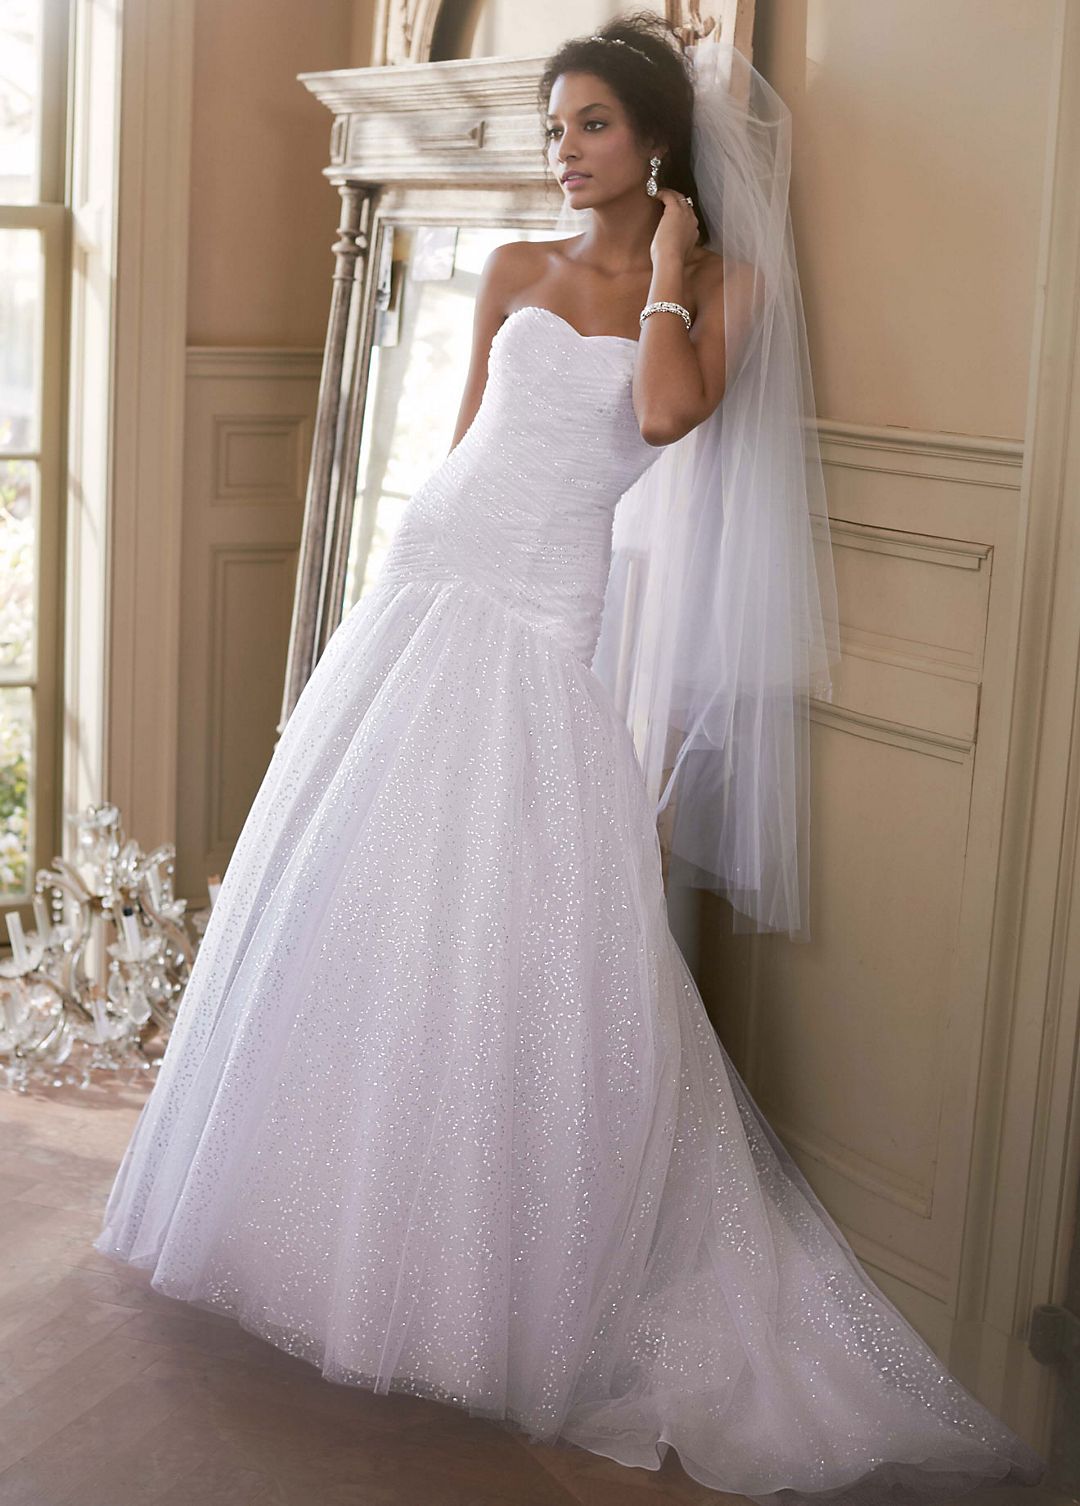 Sweetheart Sequin Tulle Ball Gown with Corset Back Image 3